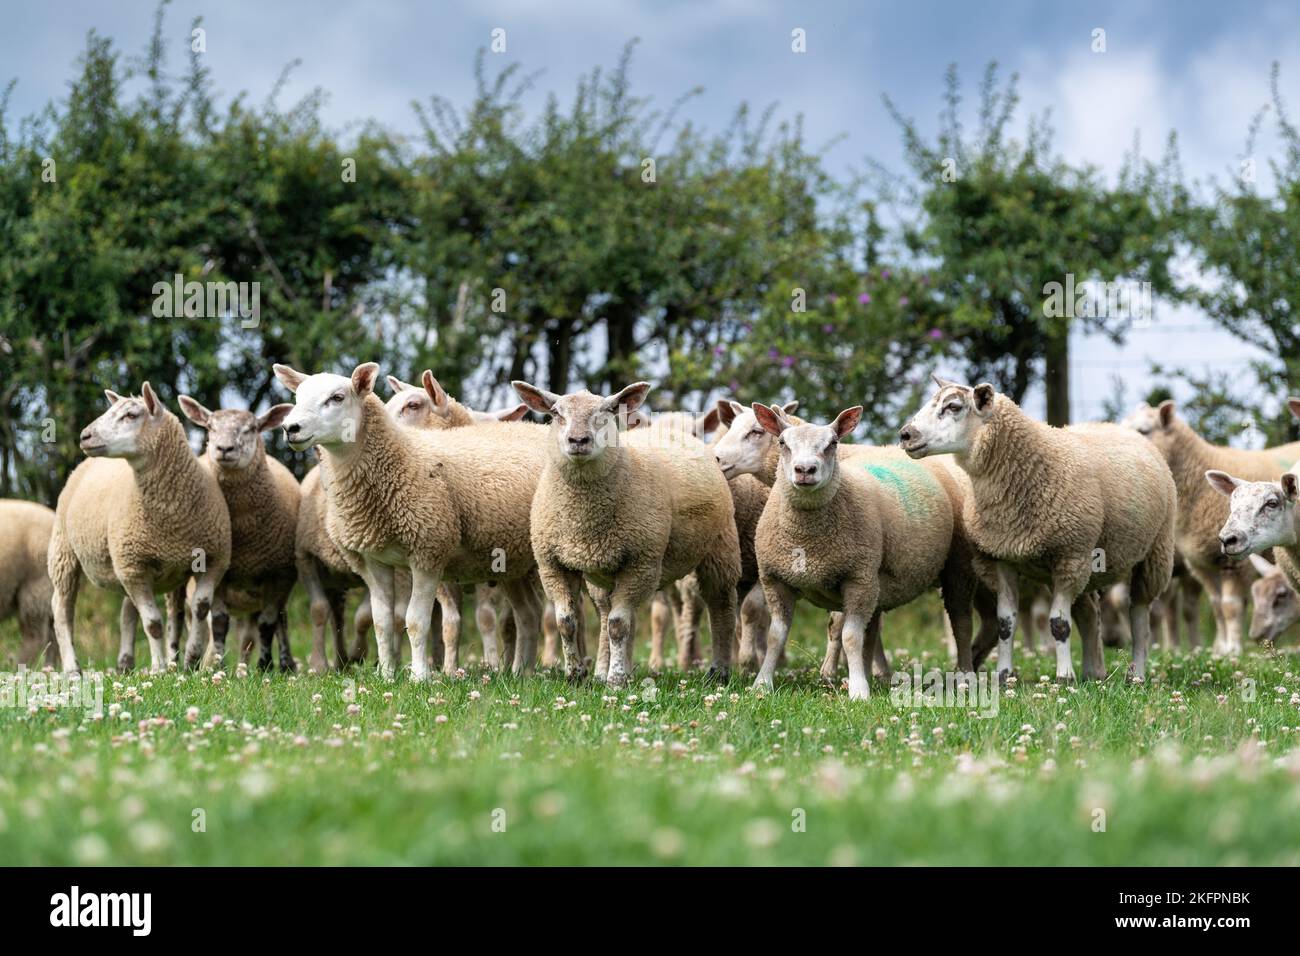 Fat lambs sired by a Charollais ram finishing on a grass ley full of White Clover, North York Moors, UK. Stock Photo